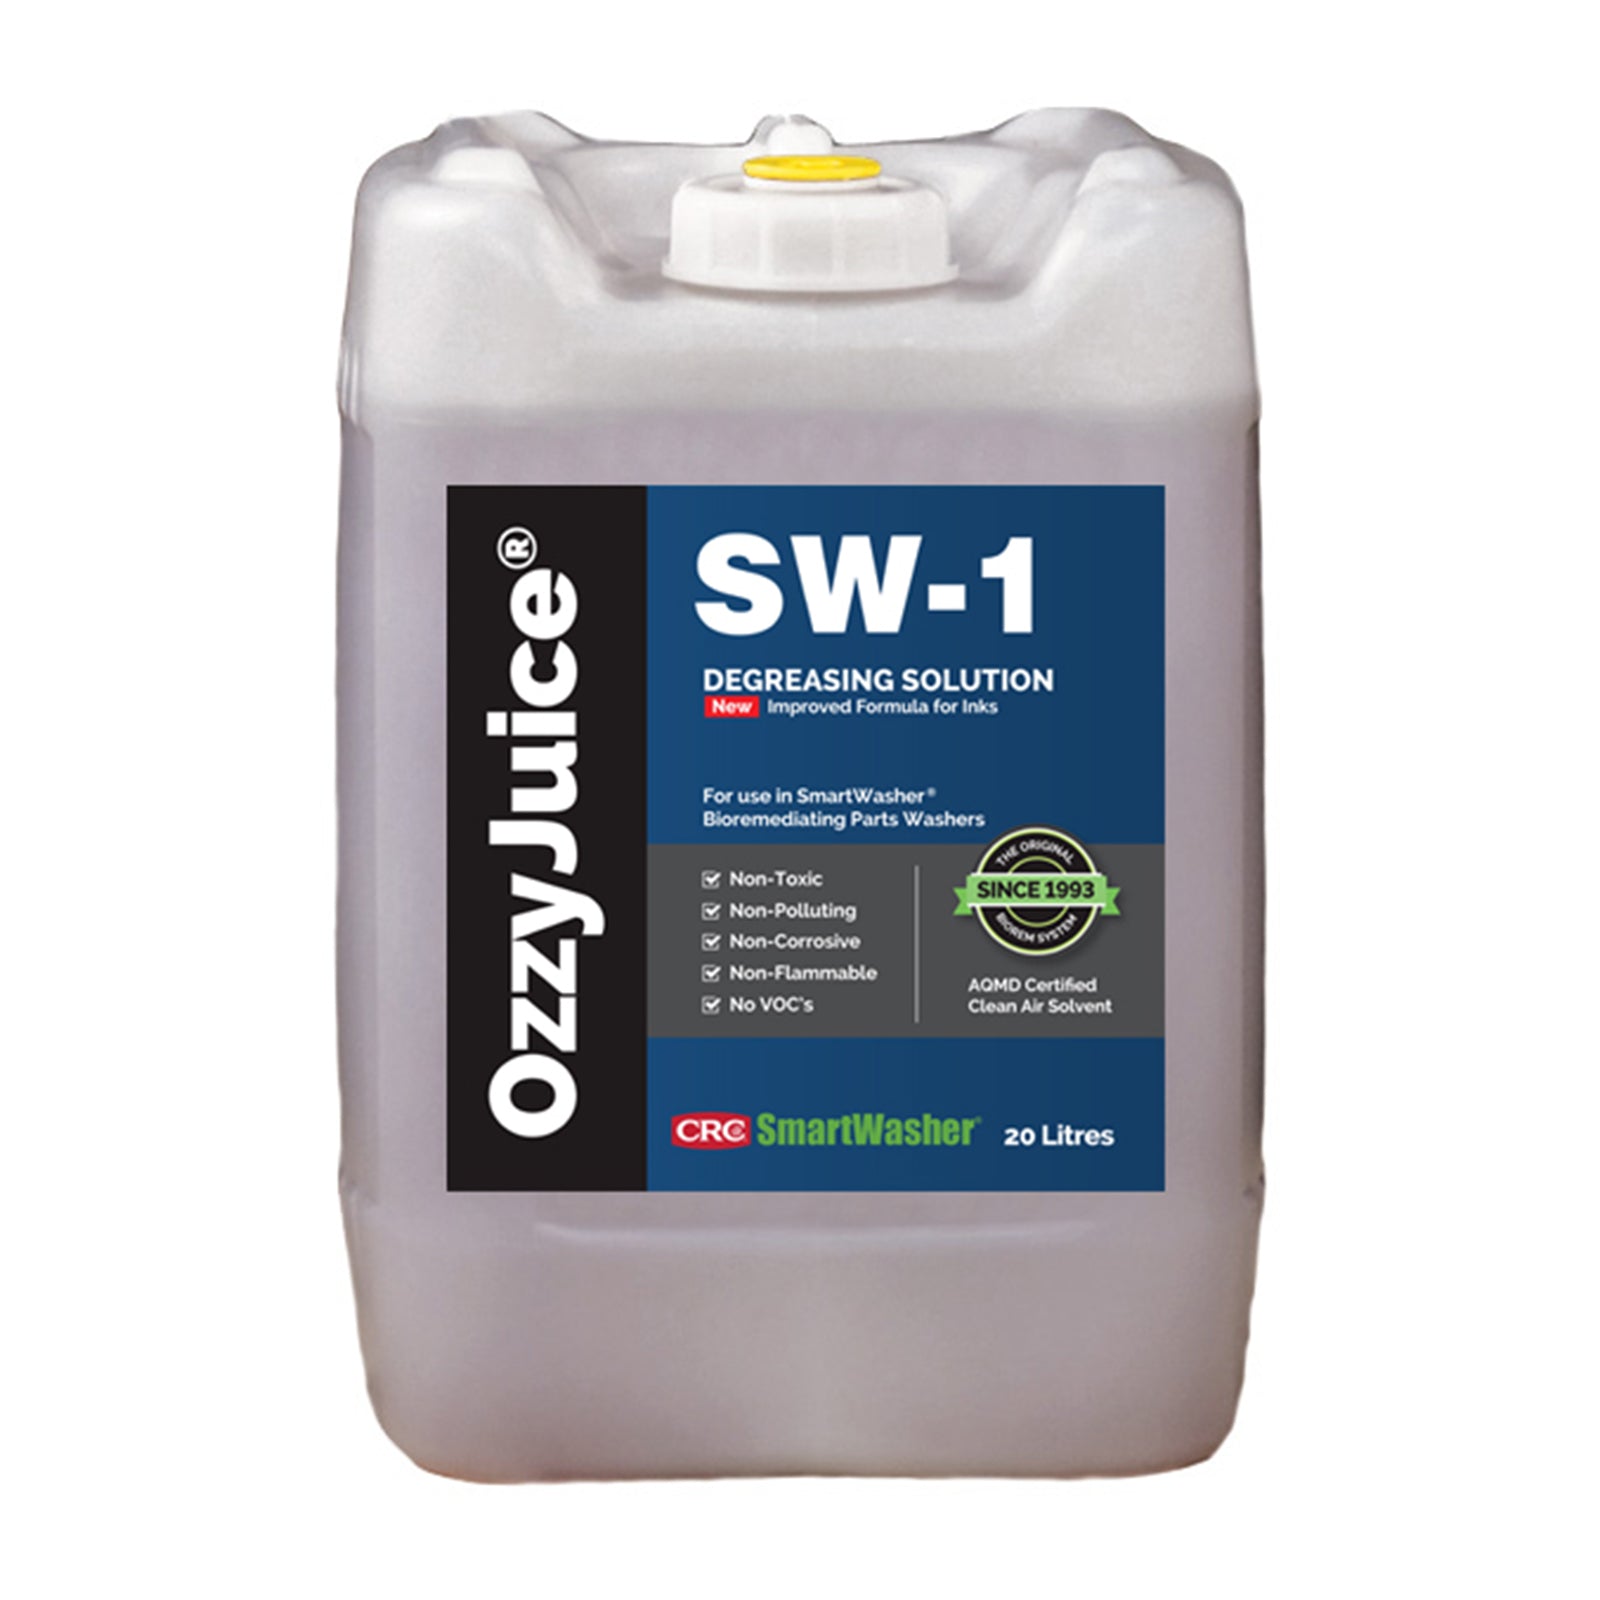 CRC OzzyJuice SW-1 Degreasing Solution 20 Litre